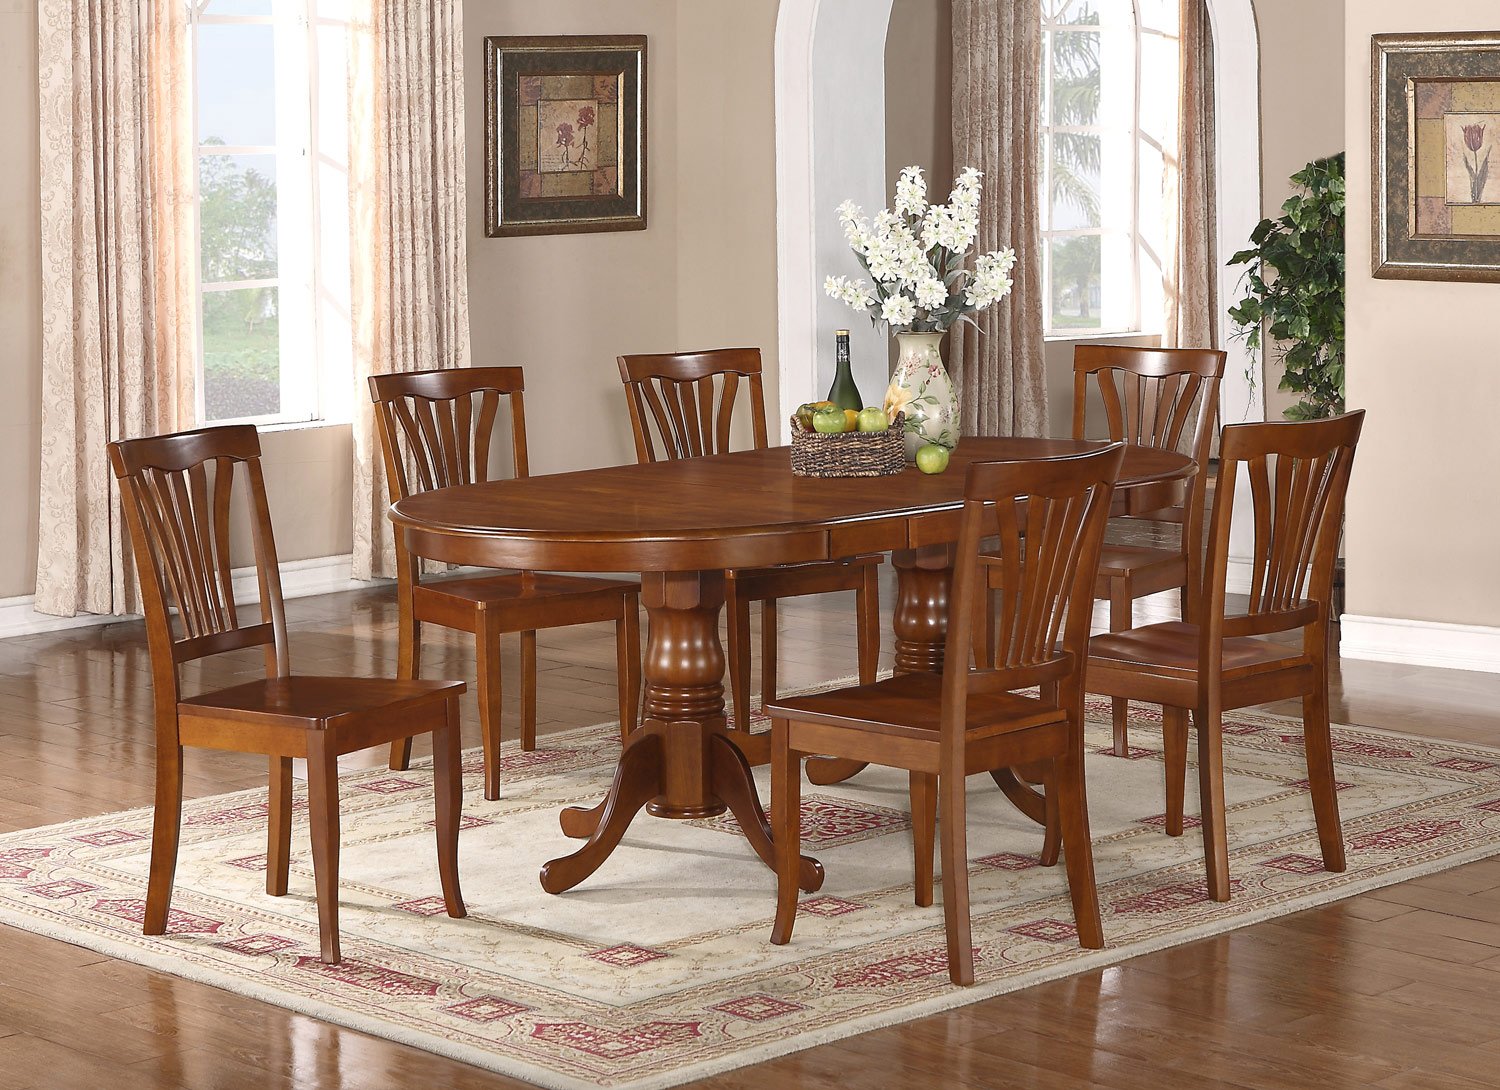 dining room table chair parts